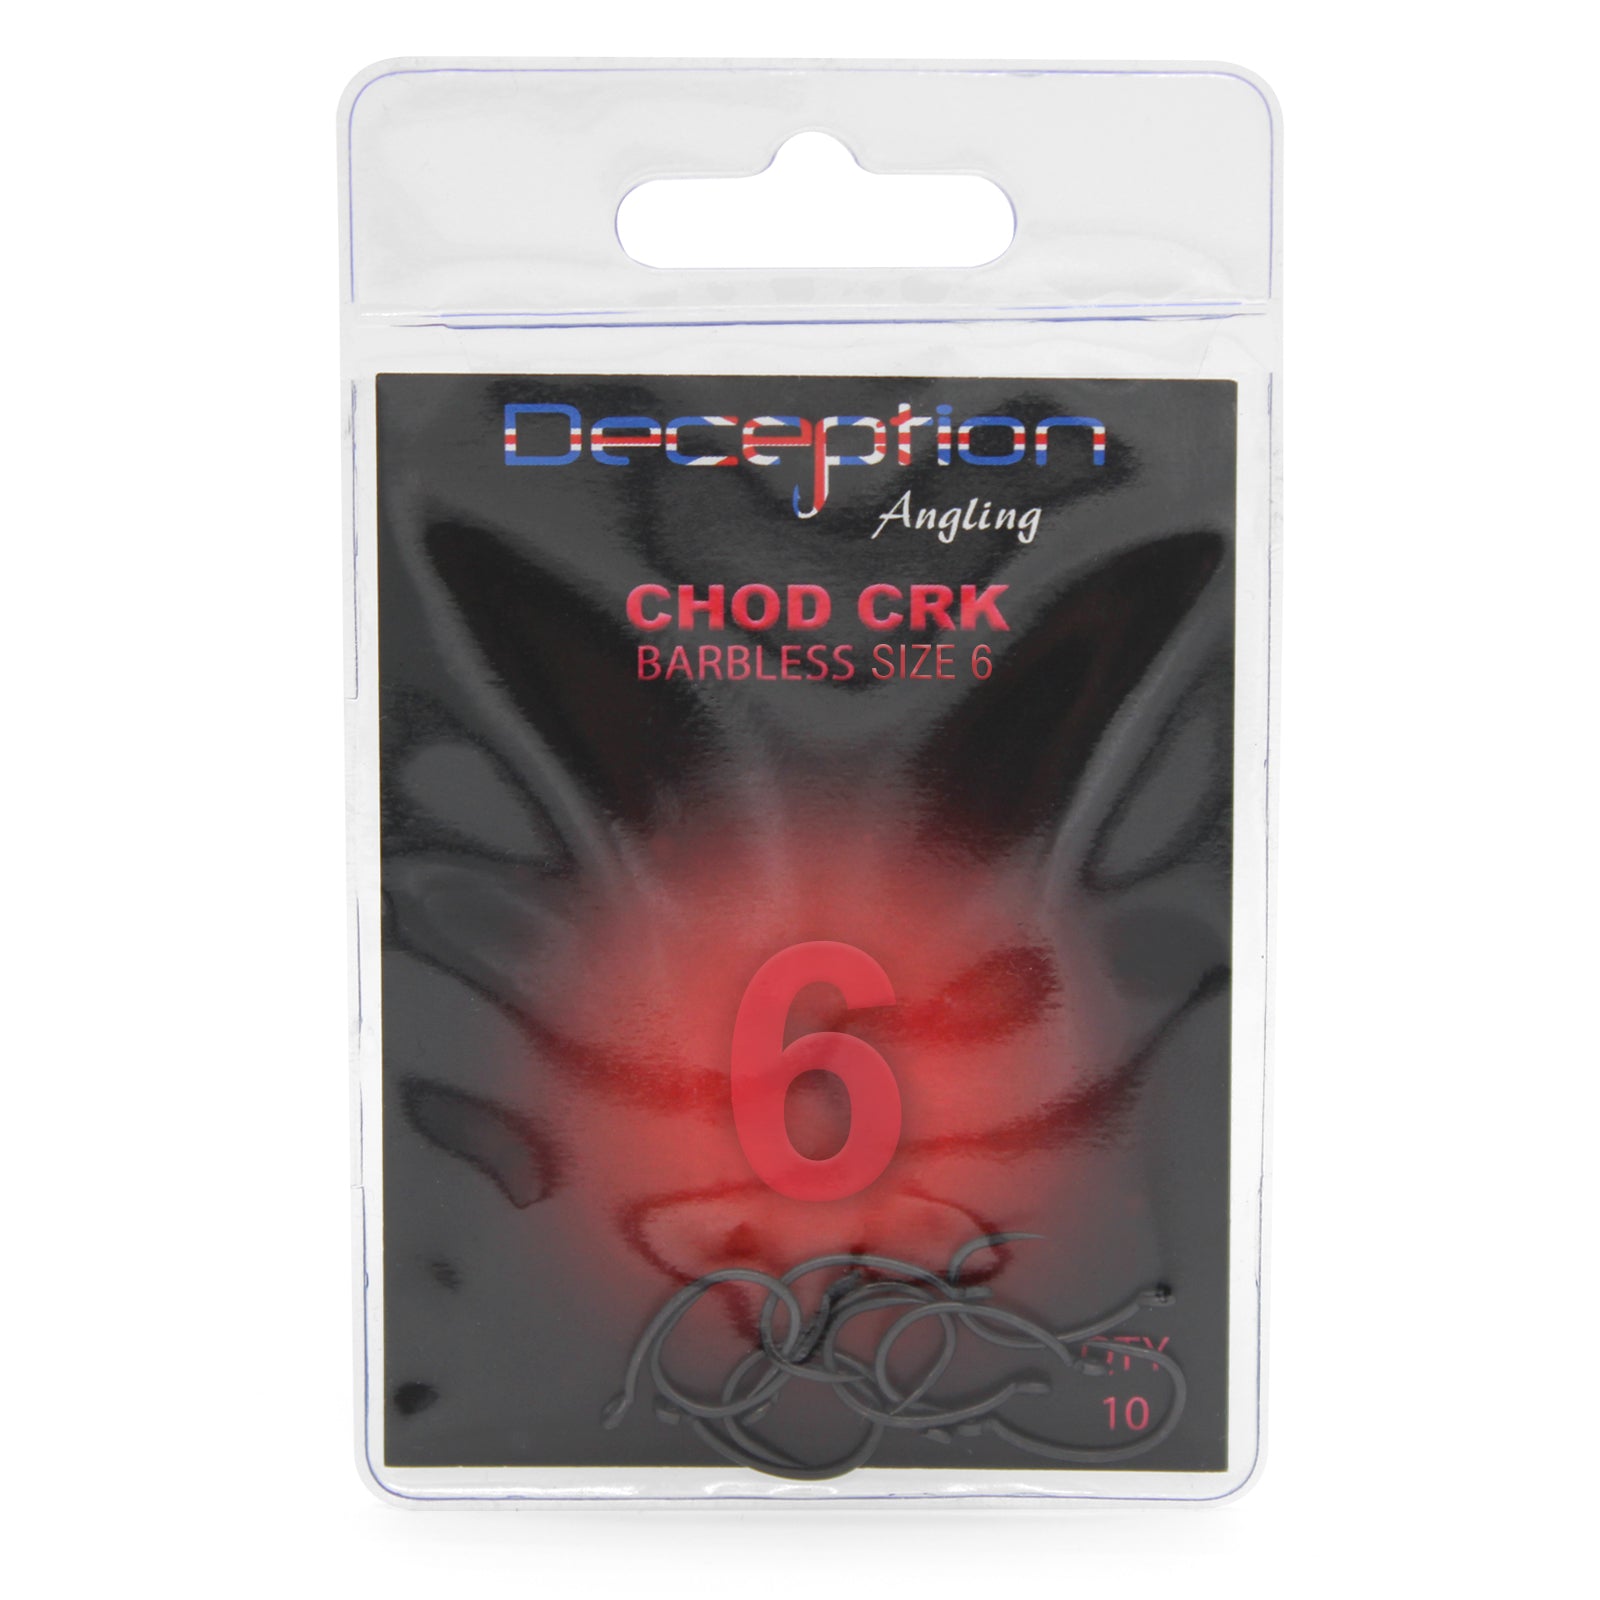 Deception Angling Chod CRK Barbless Hooks for Fishing Size 6